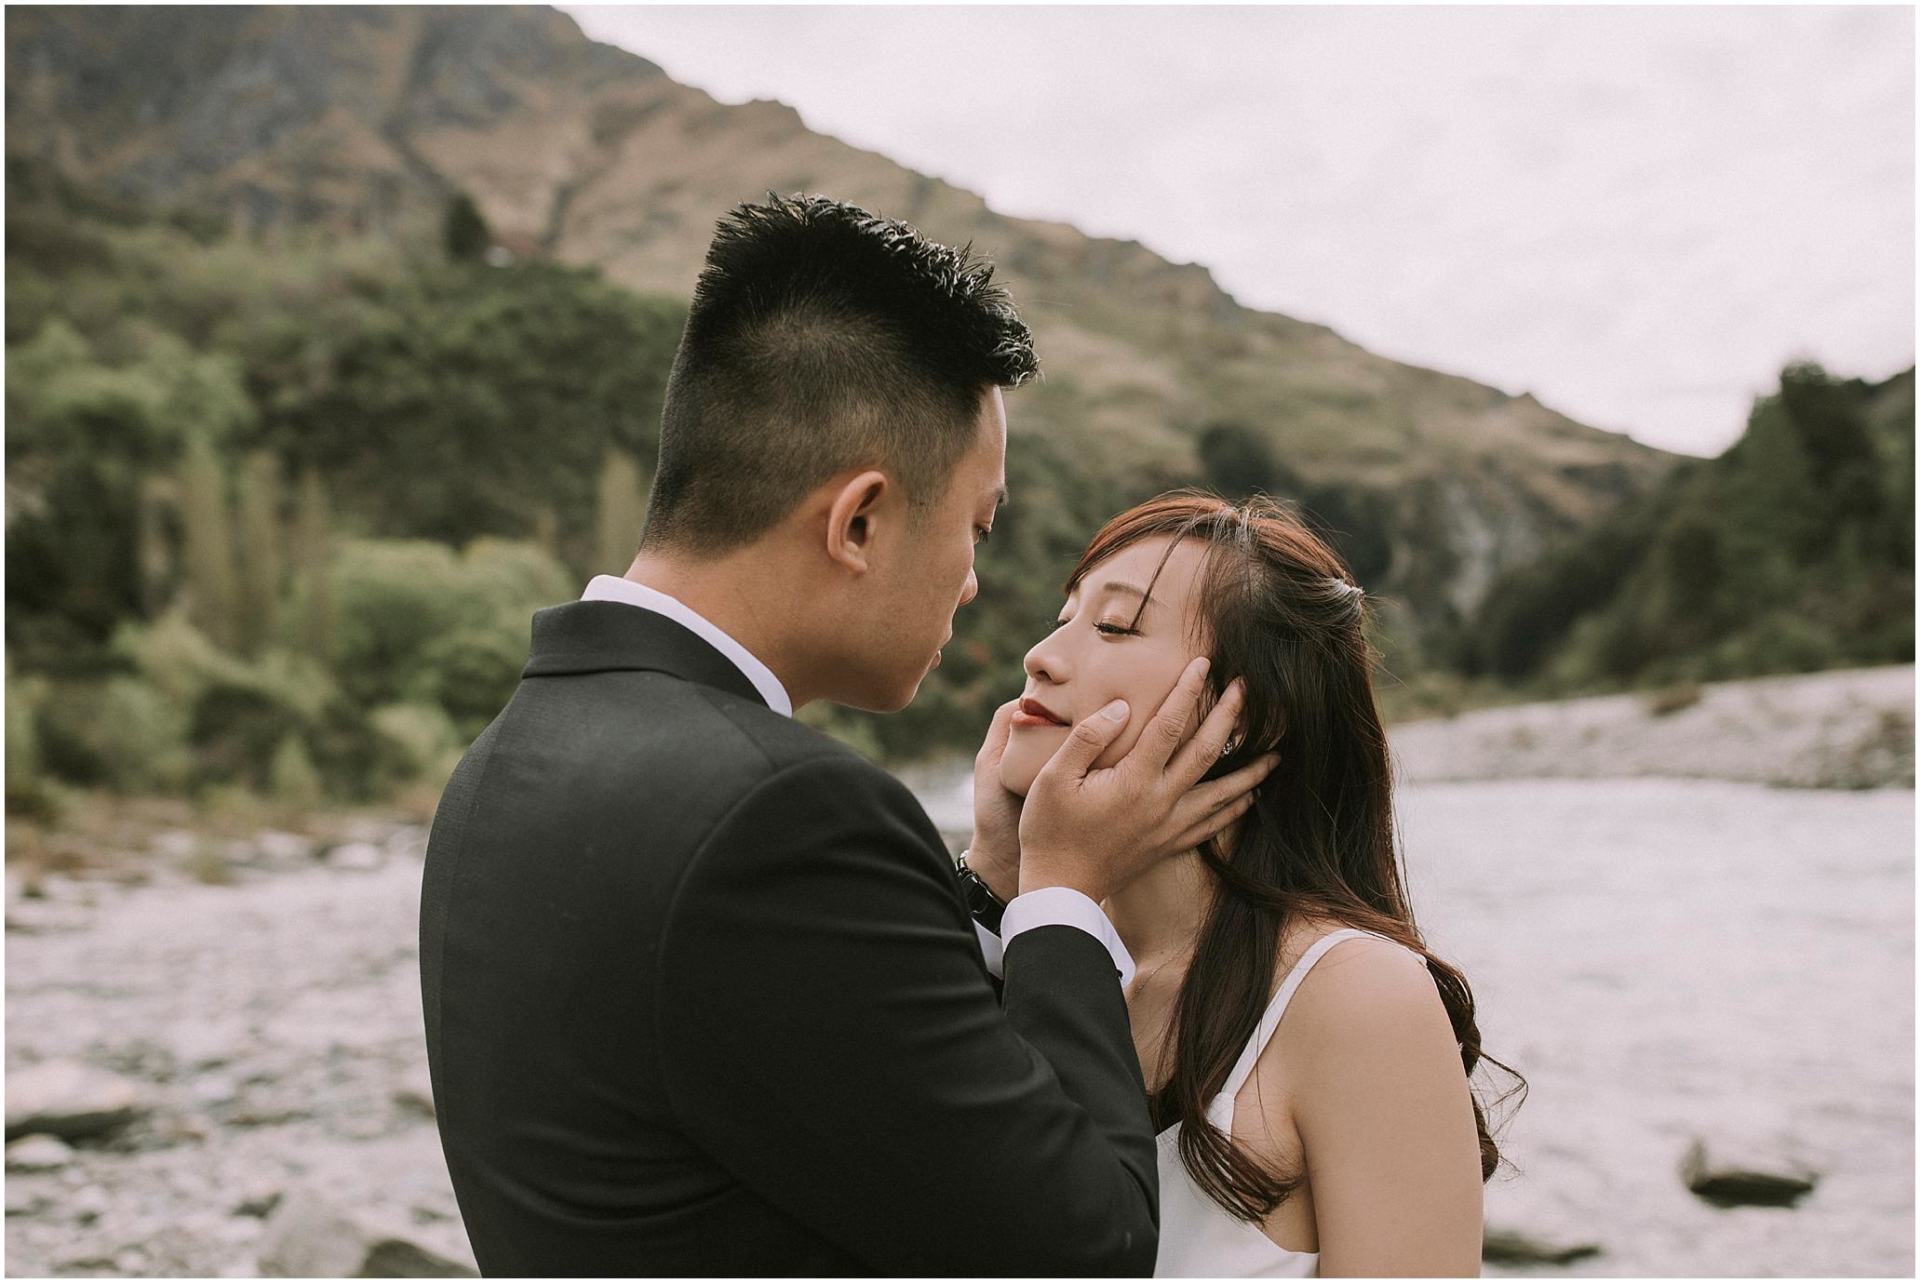 Charlotte Kiri Photography - Pre-Wedding Photography with the groom wearing a smart black dinner suit looking longingly at his bride who wears a pretty shoe-string strap slip dress, as he holds her face in his hands while they stand at the water's edge with stunning landscape behind in Wanaka, New Zealand